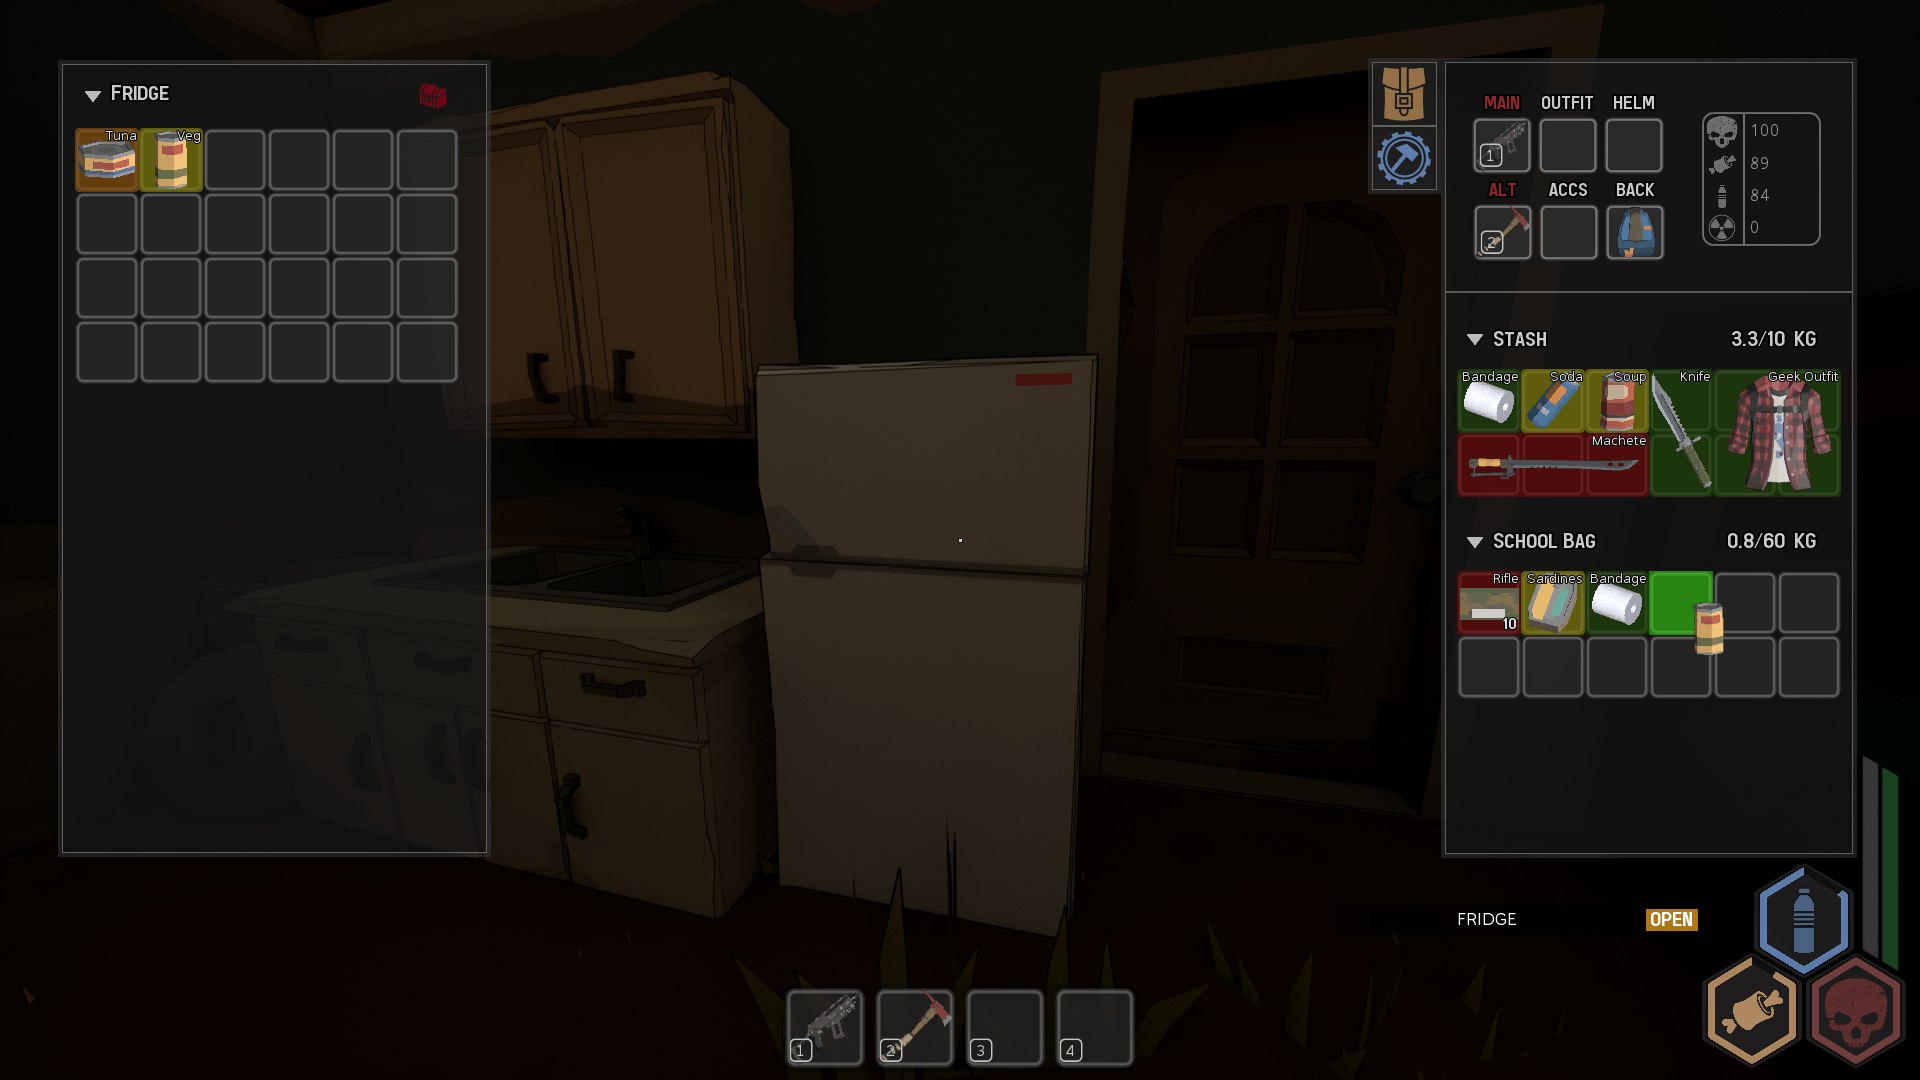 Inventory UI for our new survival game.